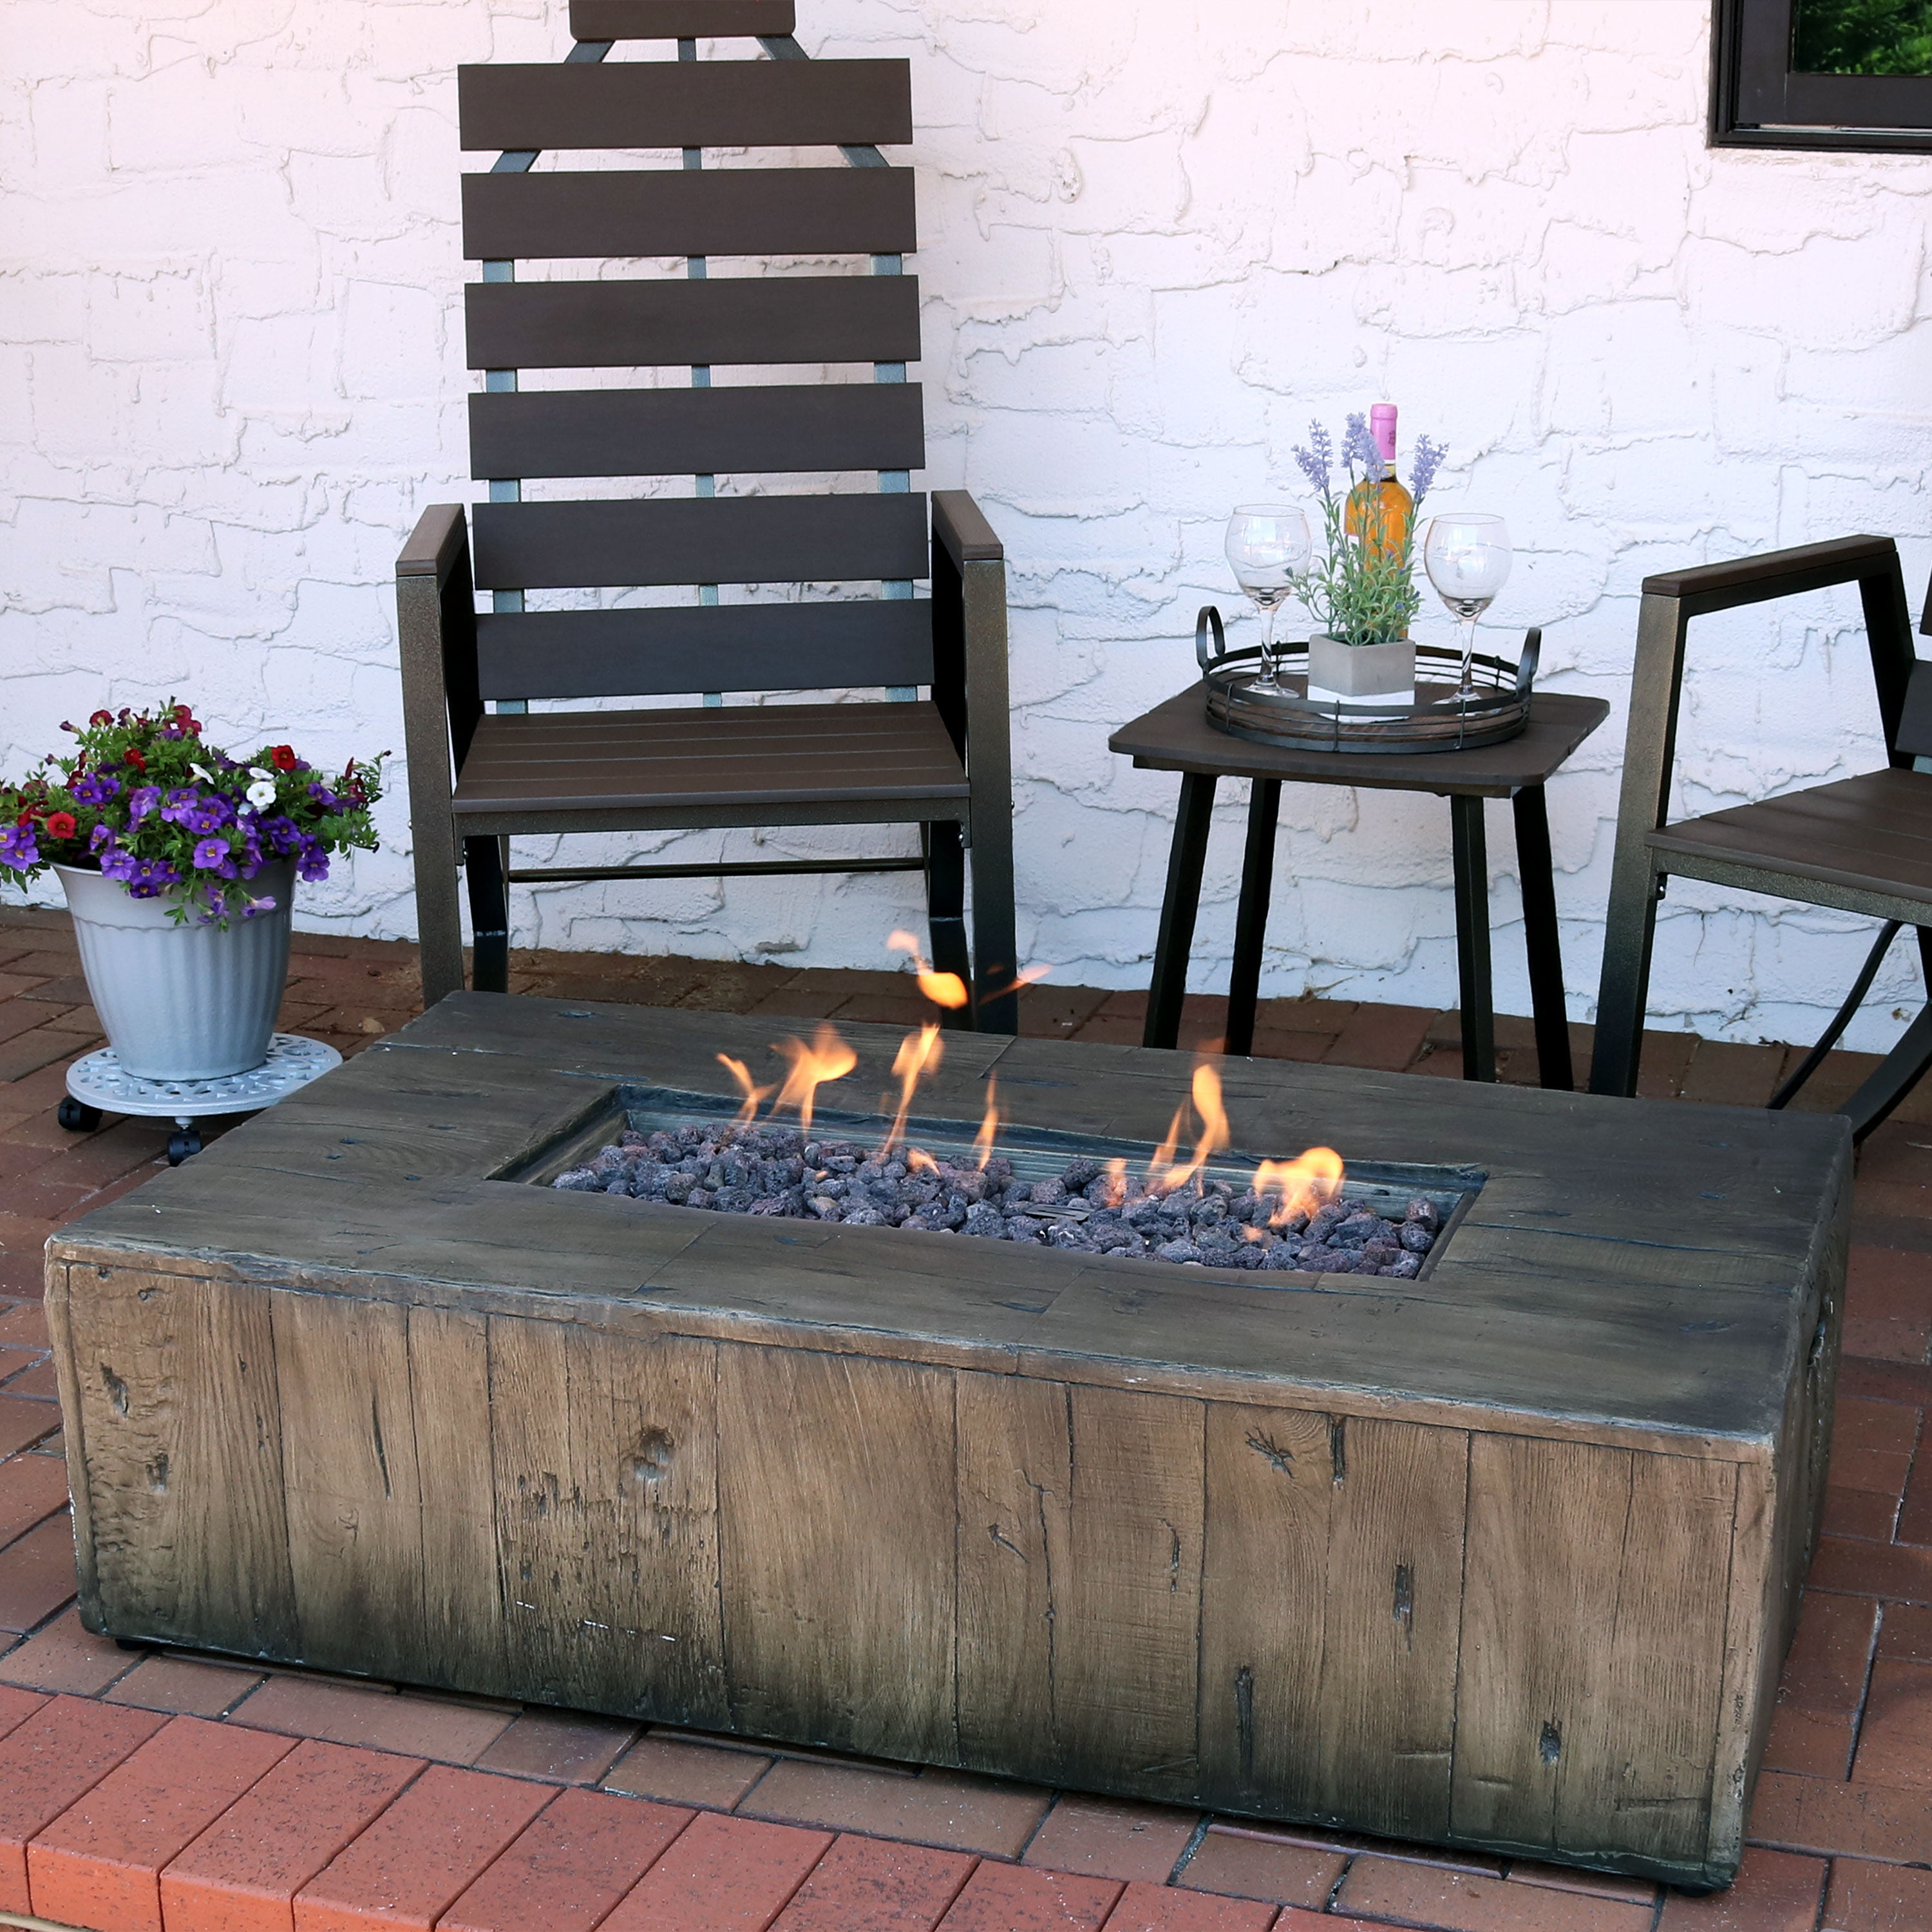 Sunnydaze Rustic Propane Gas Fire Pit, Propane Fire Pit Table With Chairs